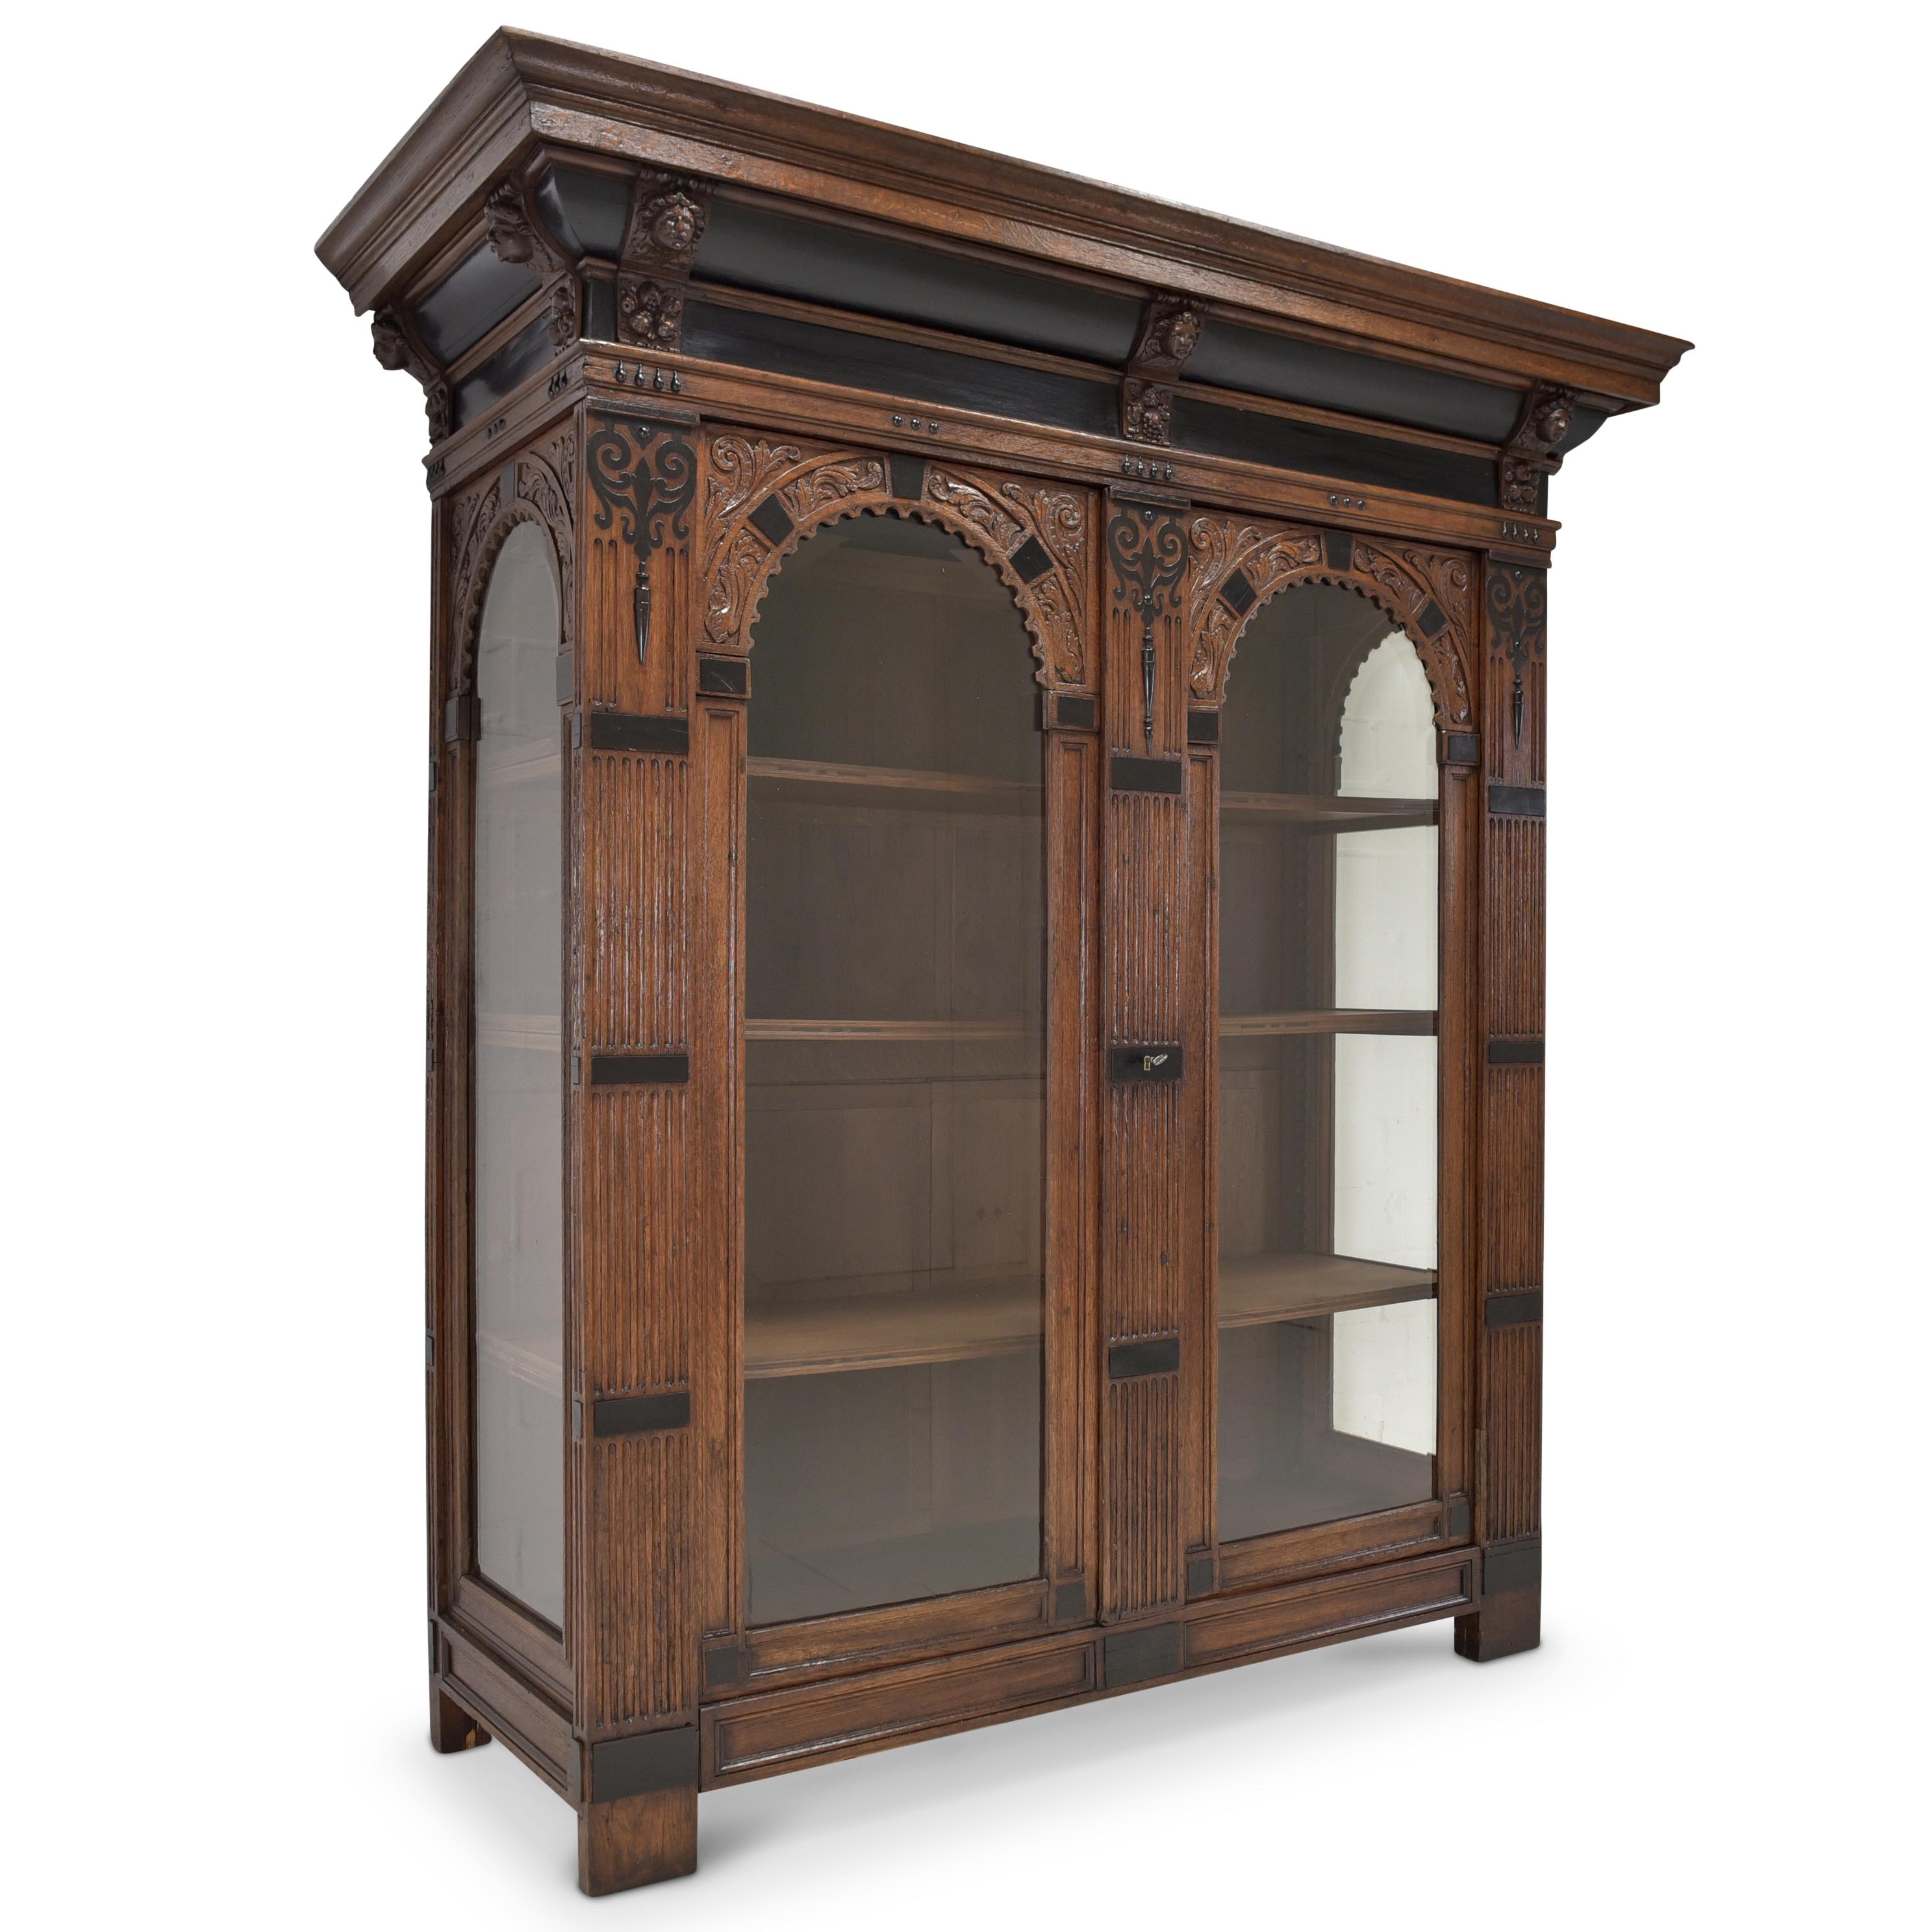 Large Flemish display cabinet restored oak Renaissance Baroque

Features:
Two-door model with 3 shelves, glazed on three sides
High quality
Heavy quality
Ebonized embellishments
Cassette fillings
Facet cut glazing
Height-adjustable